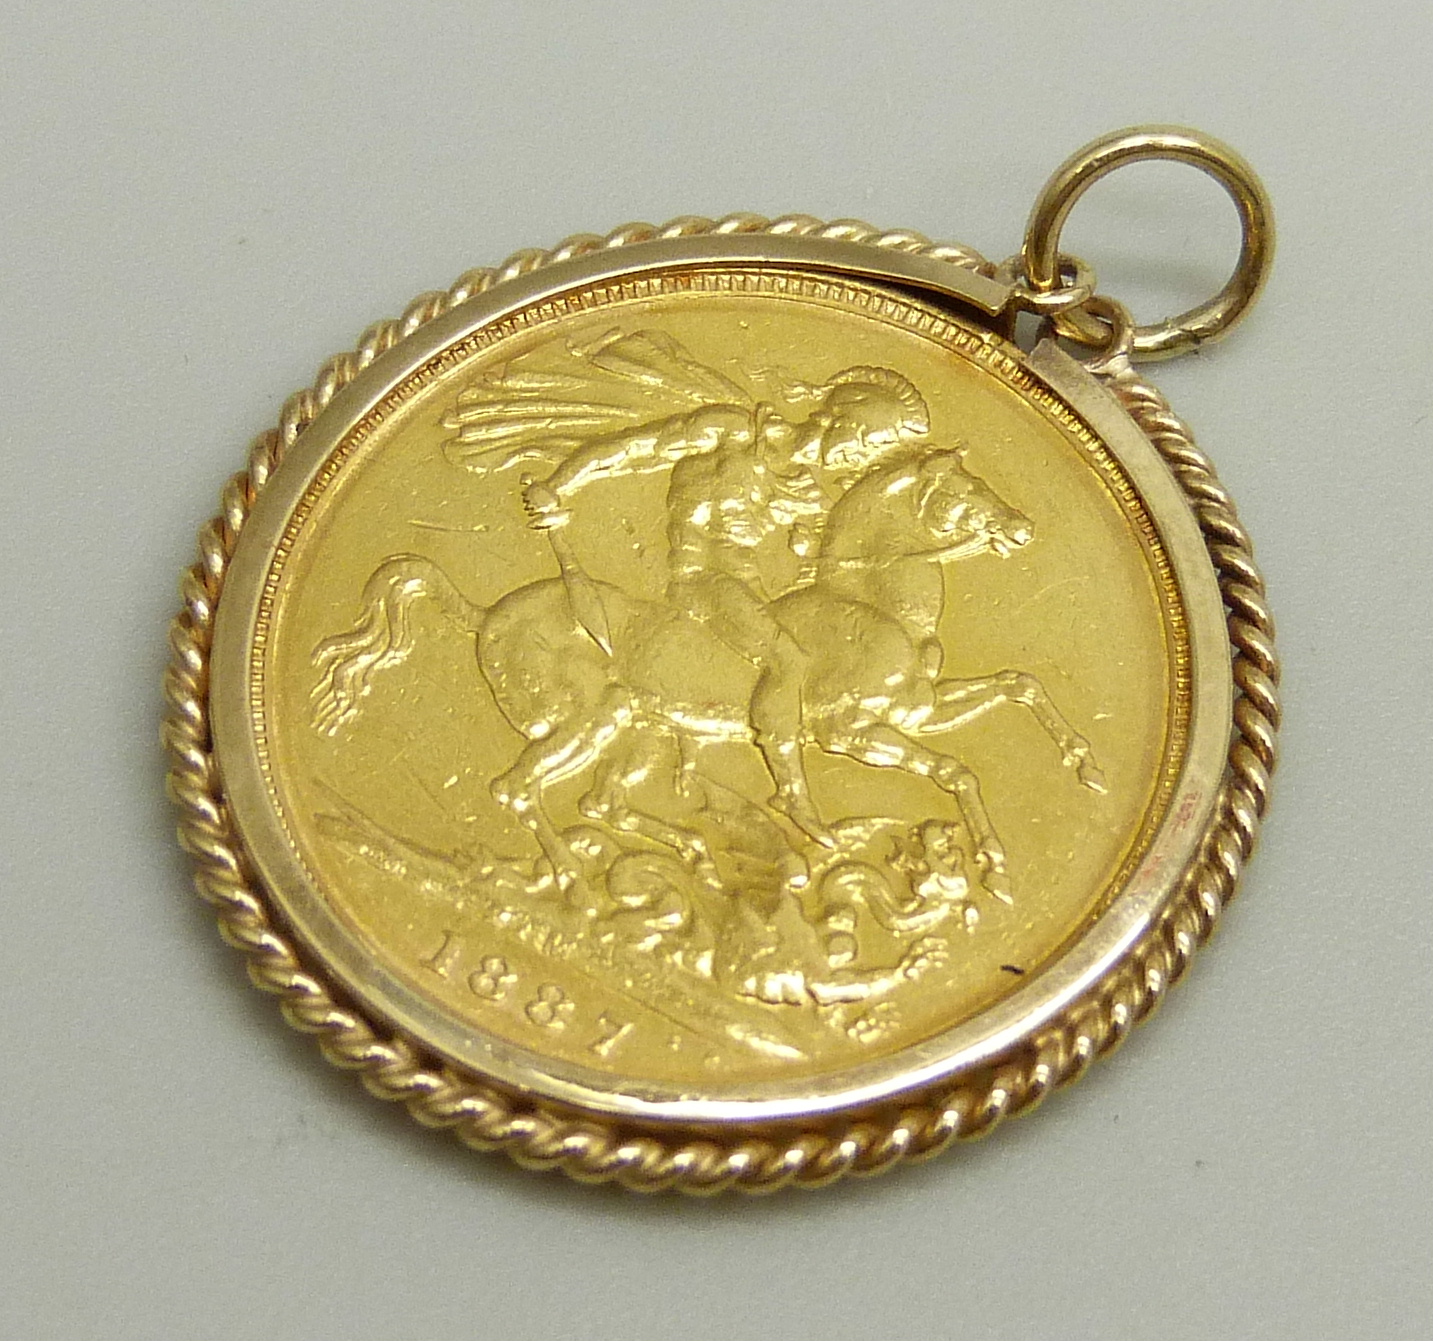 An 1887 full sovereign in a yellow metal pendant mount, 9.4g